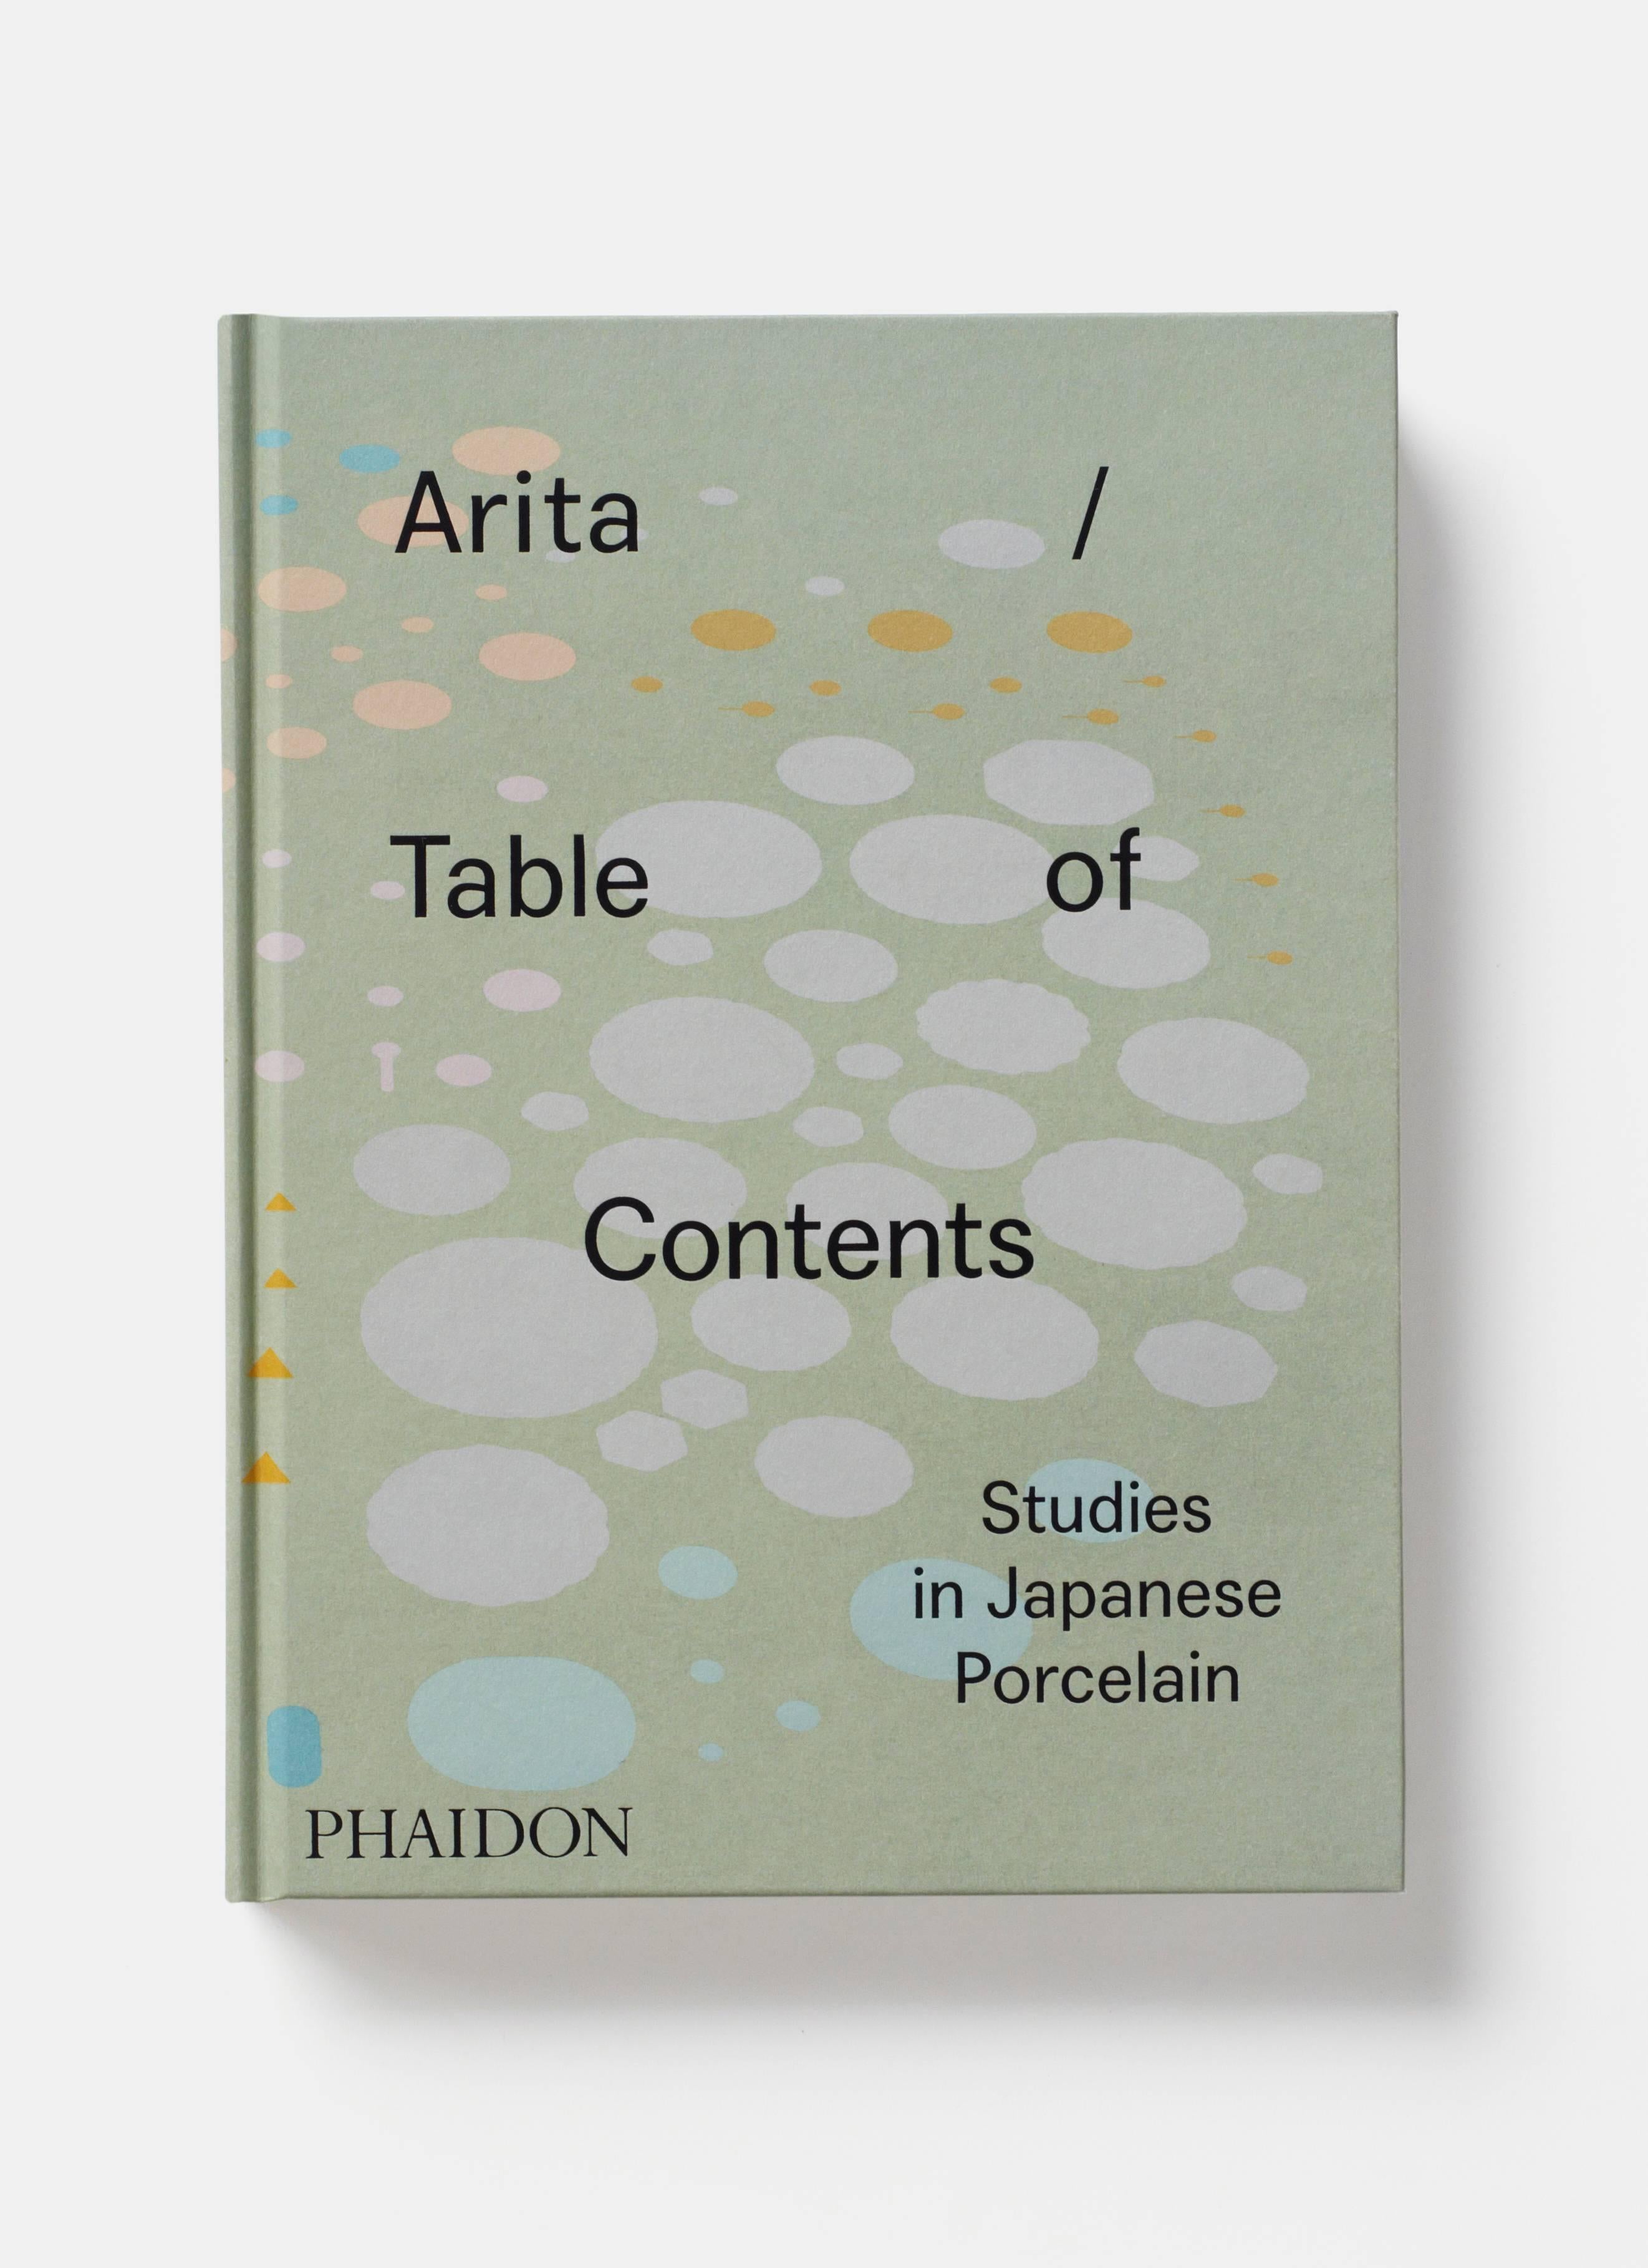 <p>Celebrating the 400th anniversary of traditional Japanese ceramic culture as interpreted by today’s leading designers</p>

<p>The art of Japanese porcelain manufacturing began in Arita in 1616. Now, on its 400th anniversary, Arita / Table of